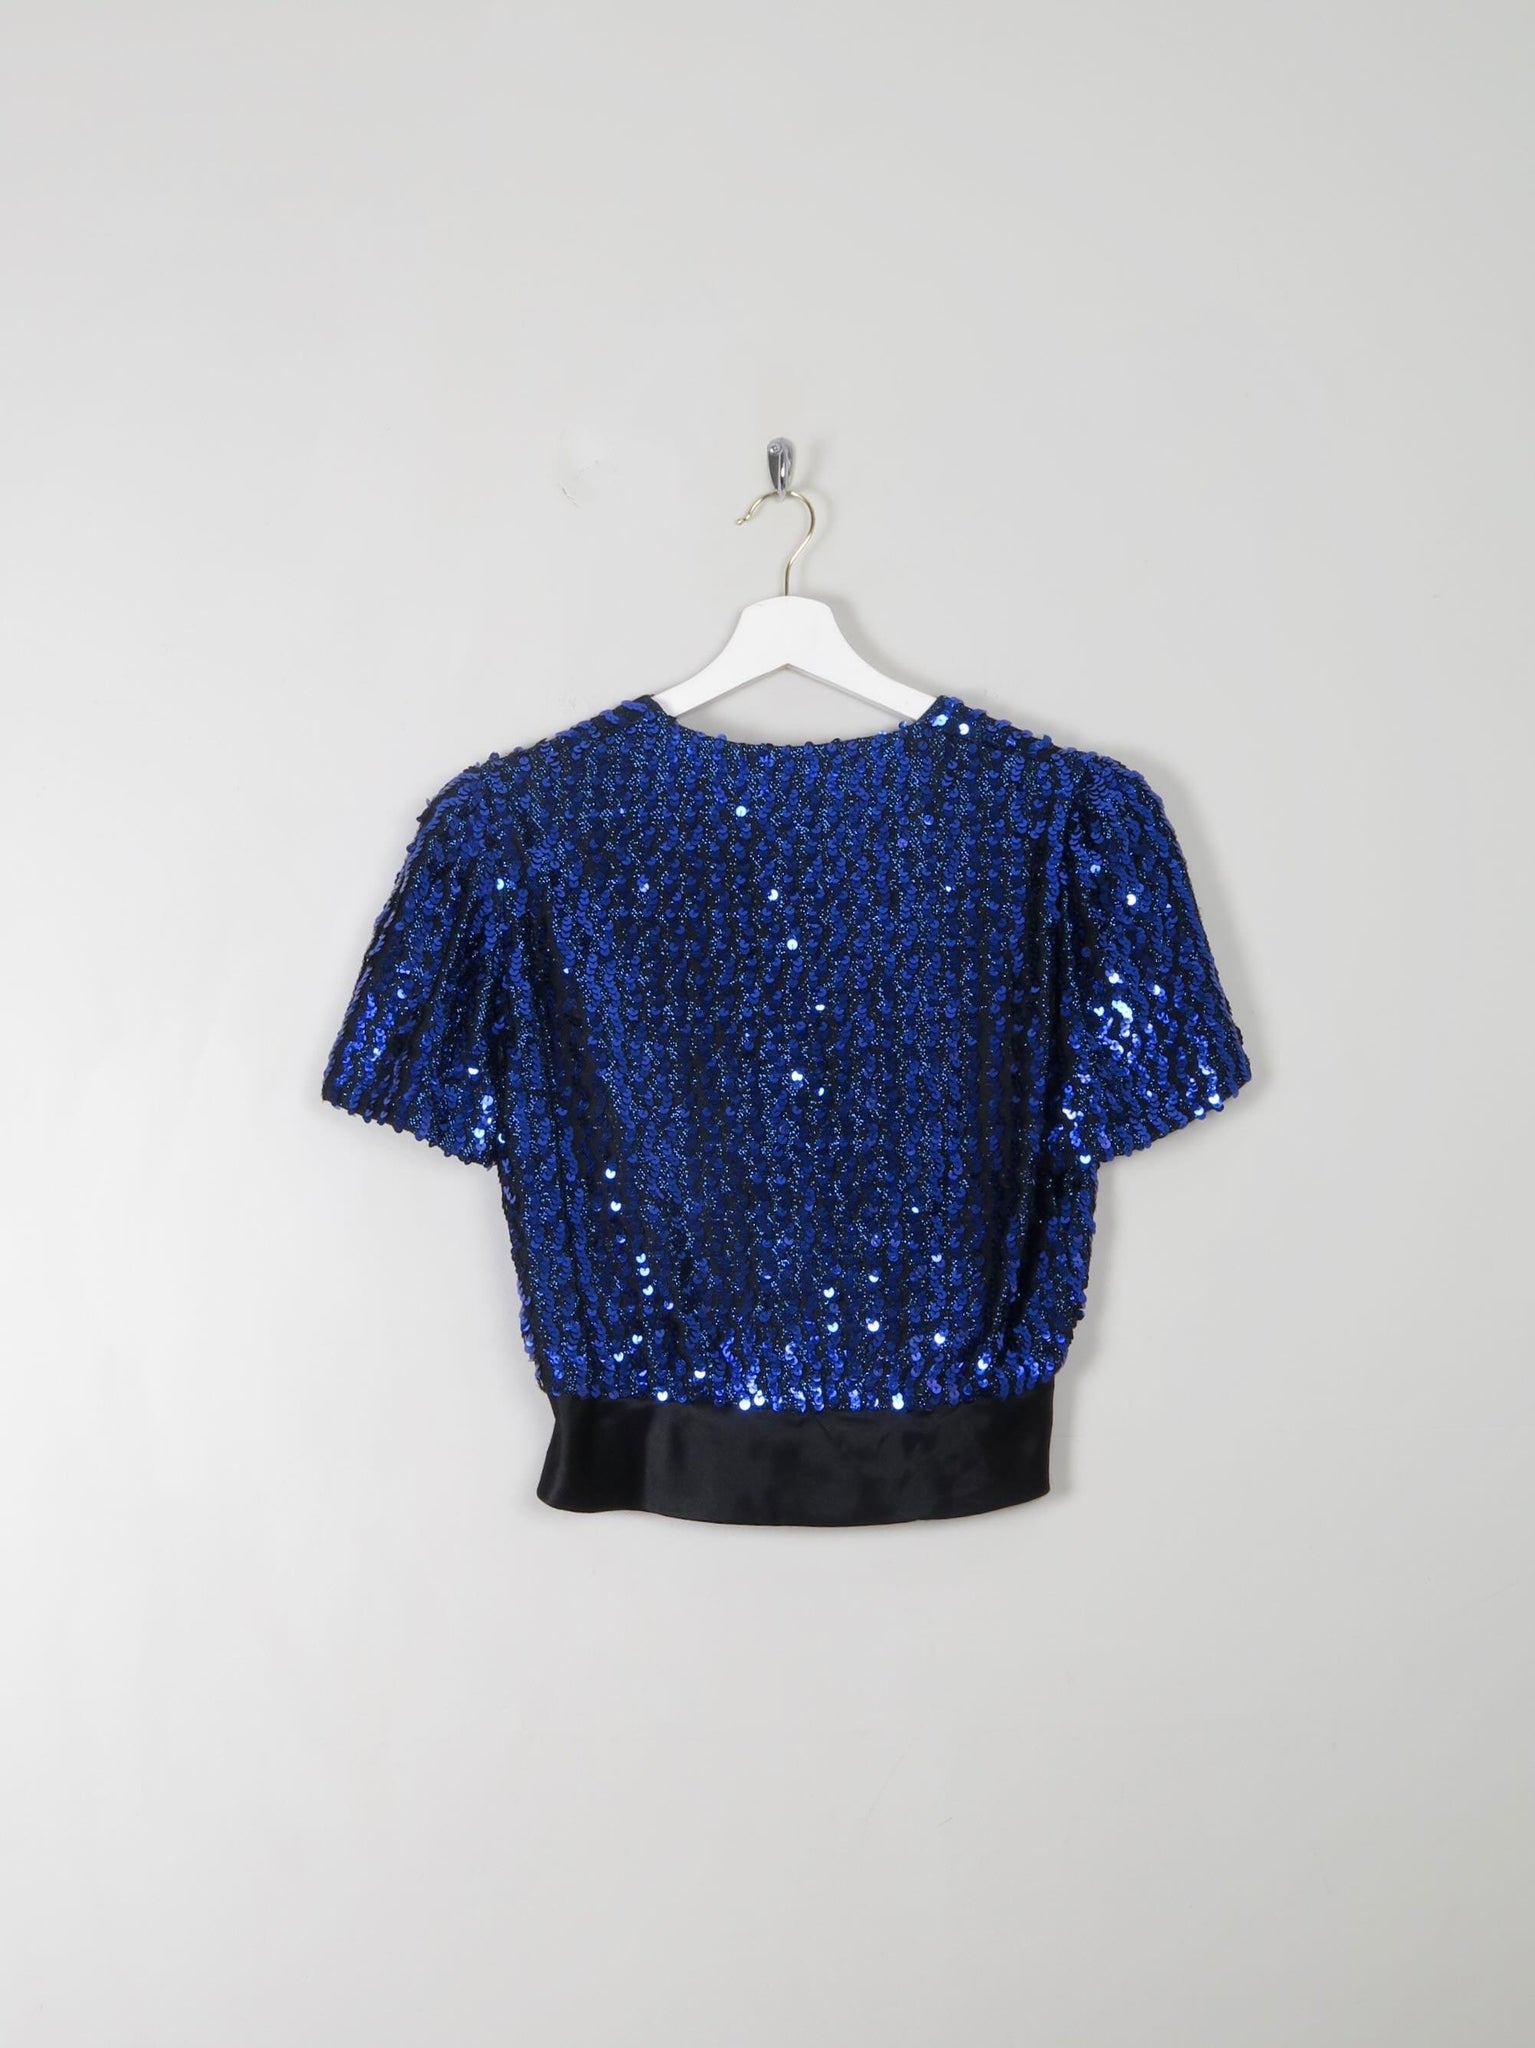 Women's Vintage  Electric Blue Sequin Cropped Top XS/S - The Harlequin